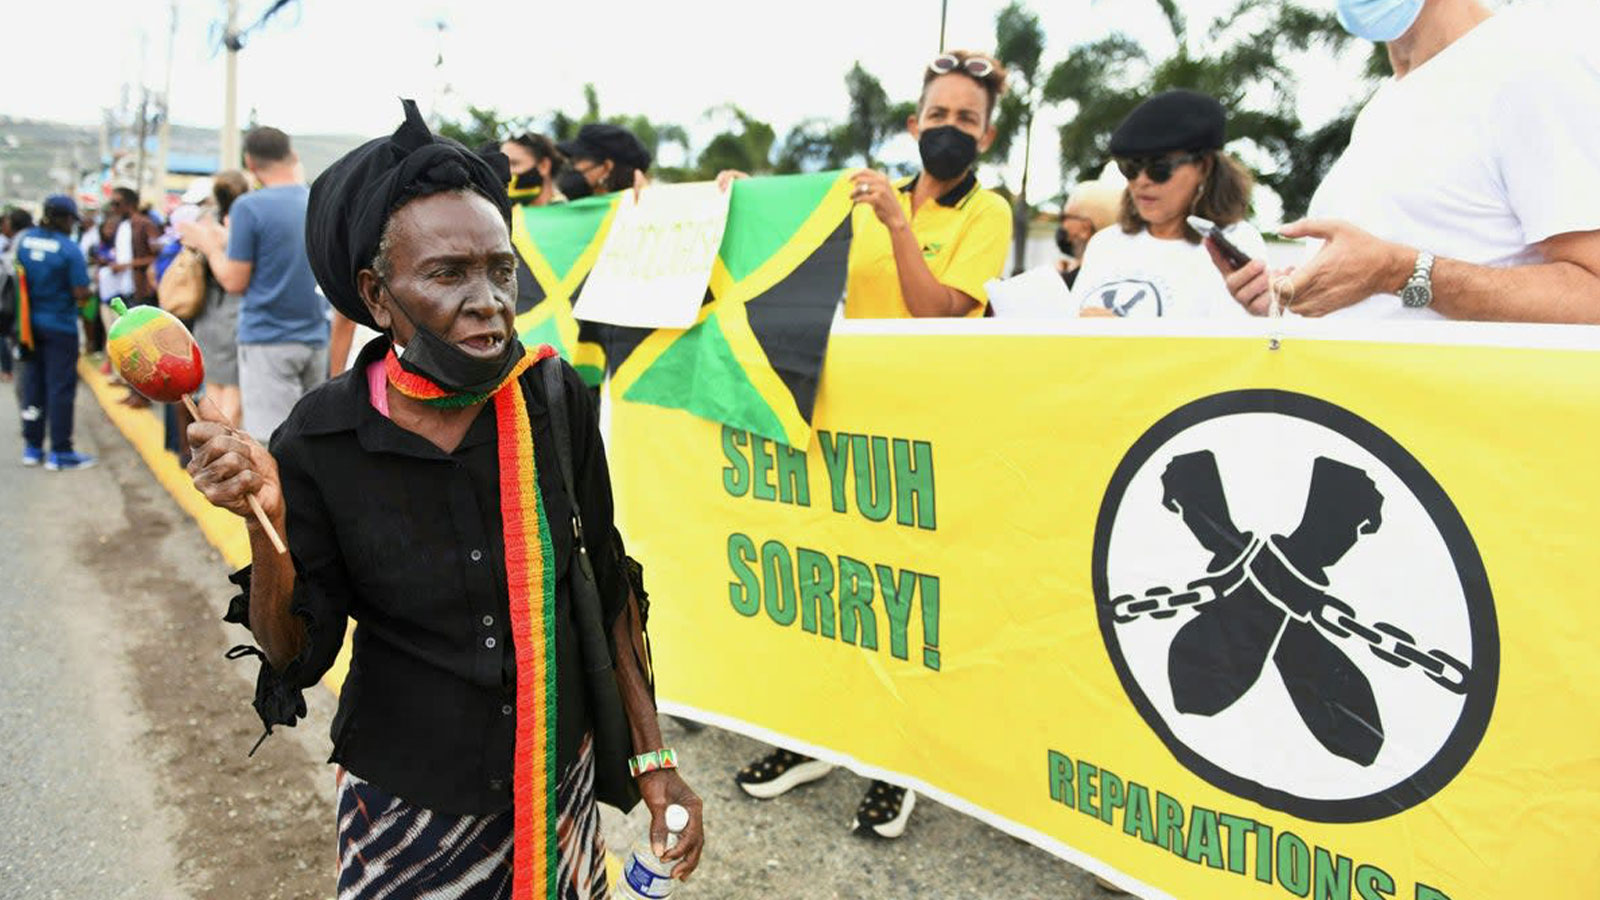 A reparations protest in Jamaica during last year’s royal tour of the nation